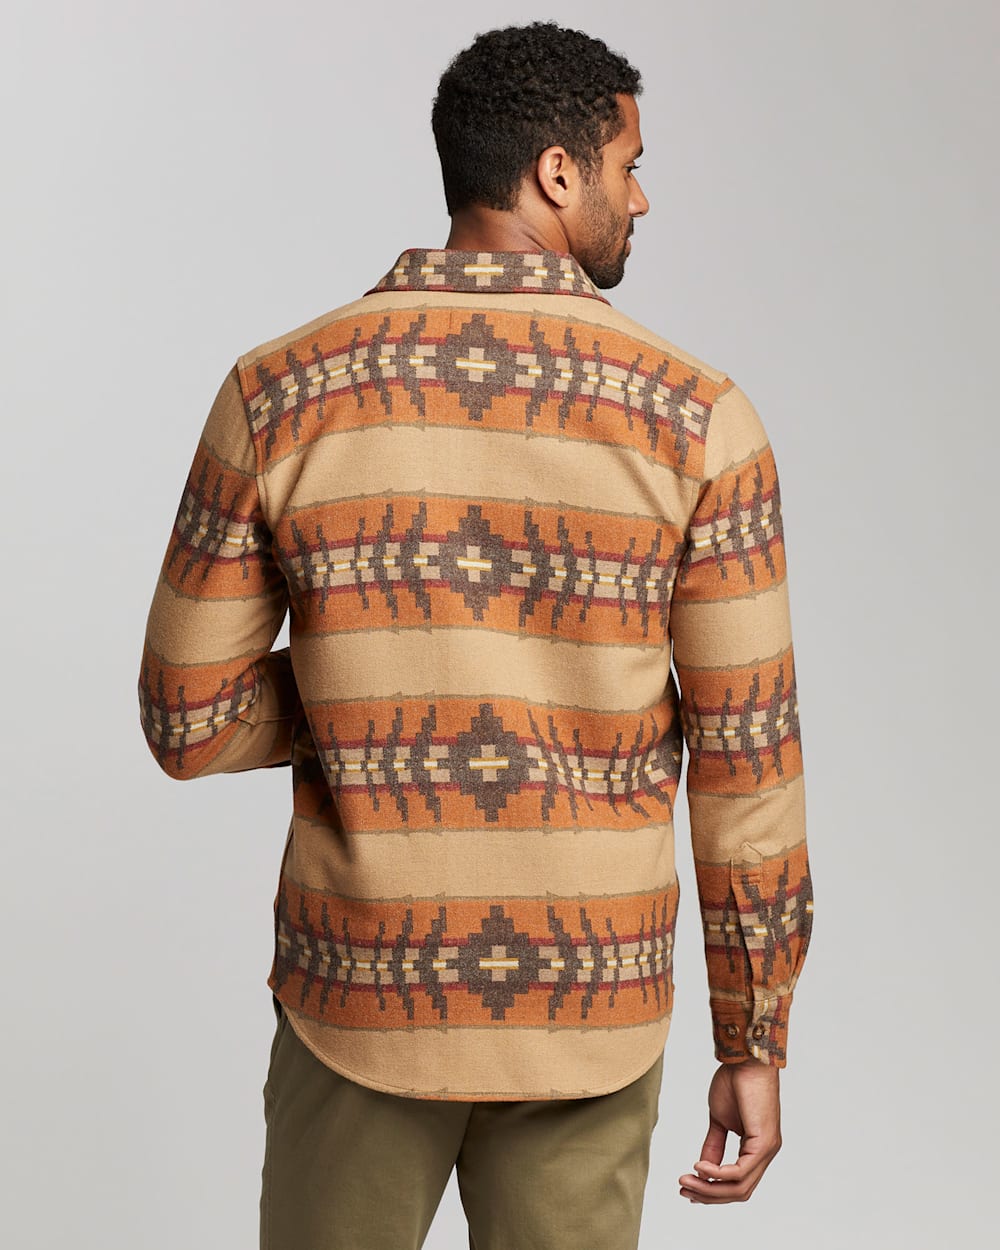 ALTERNATE VIEW OF MEN'S FITTED LA PINE OVERSHIRT IN TAN BANDED STRIPE image number 3